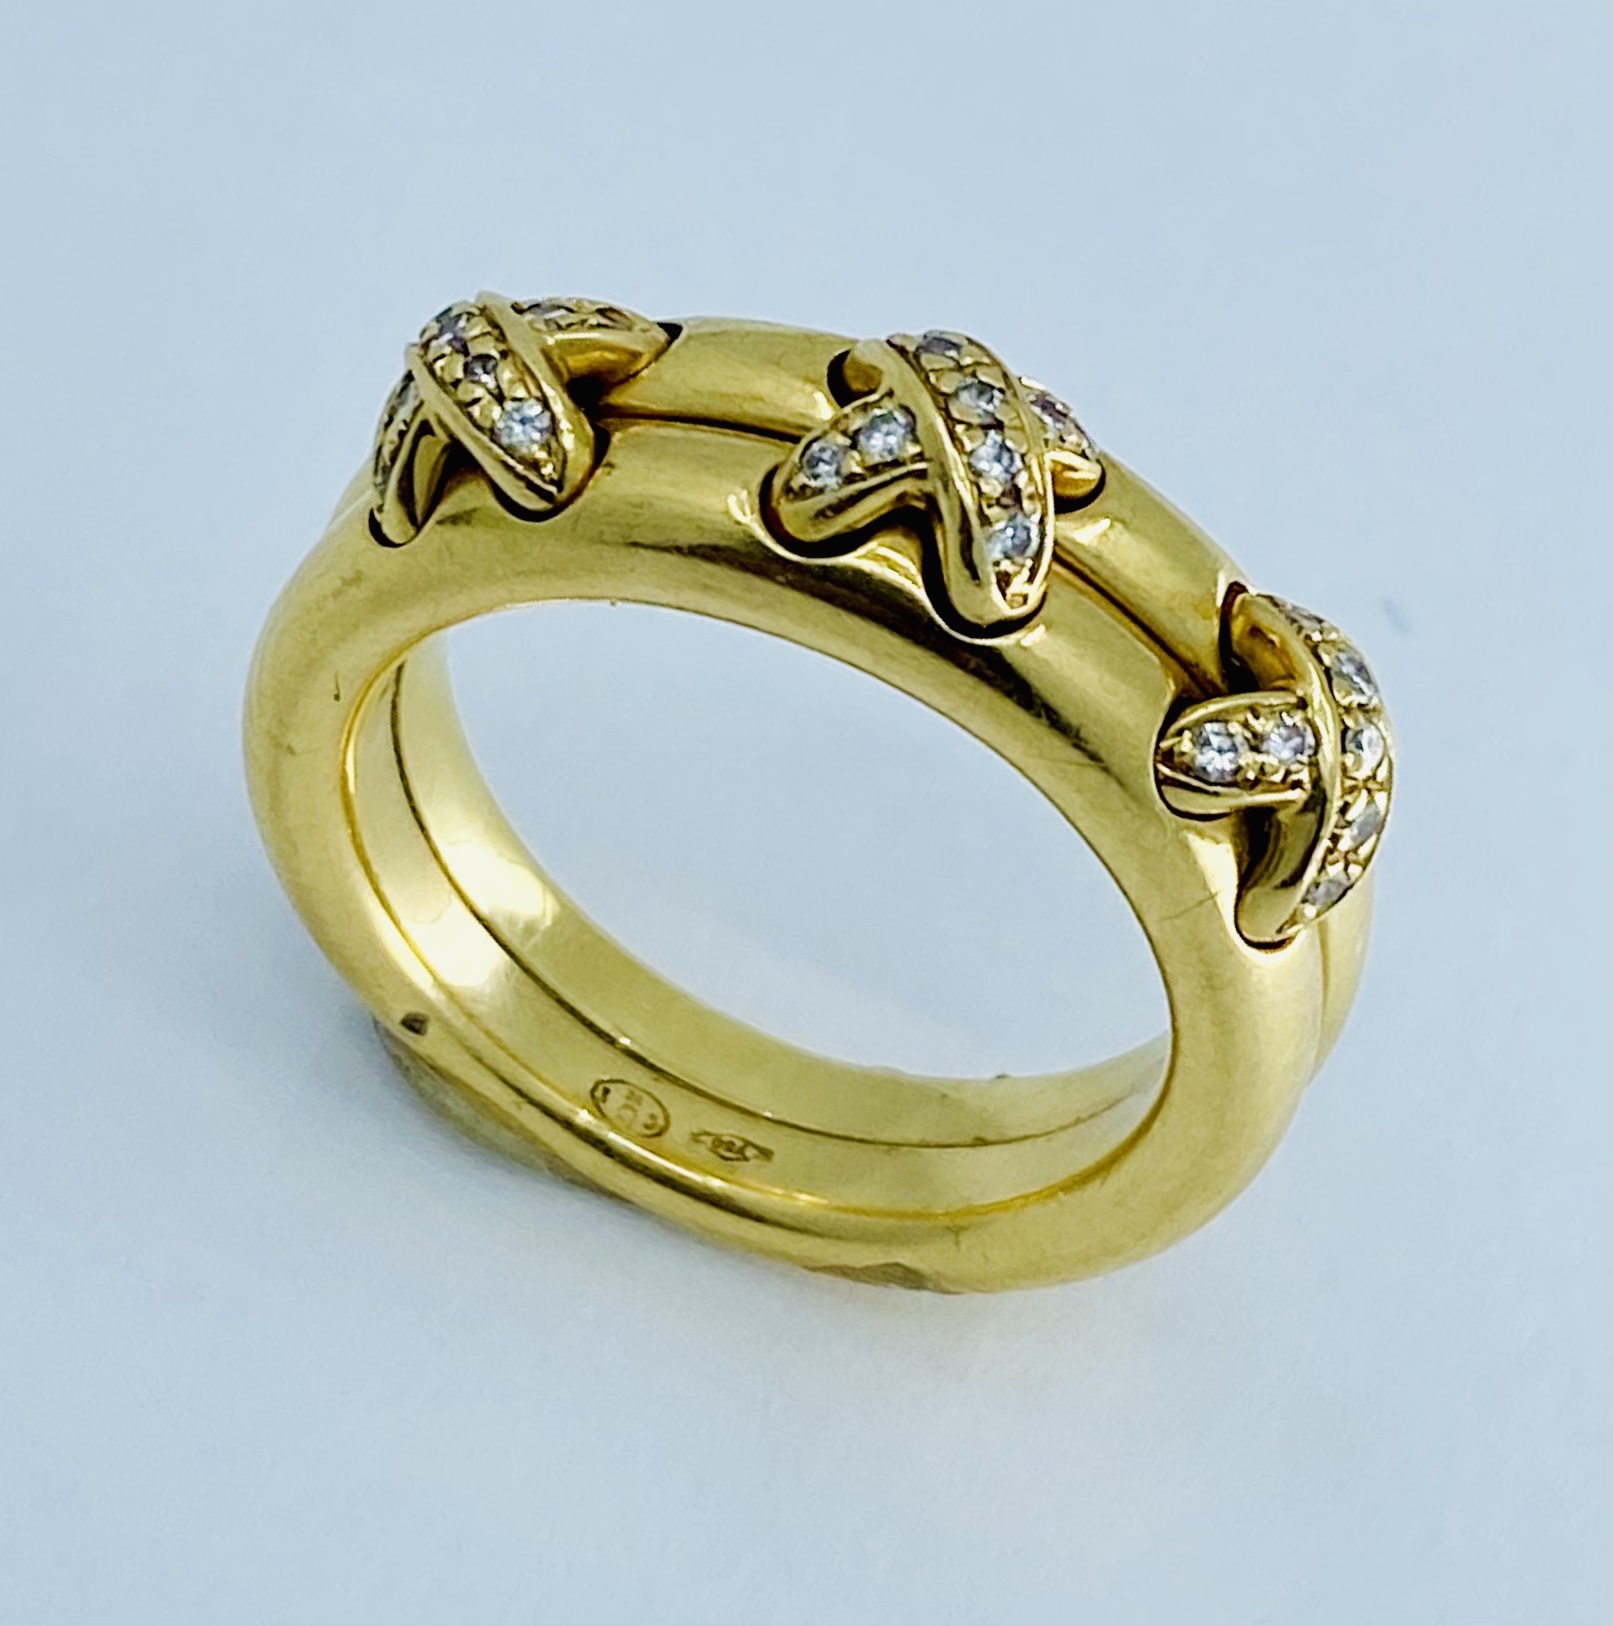 Chaumet Liens Gold Ring